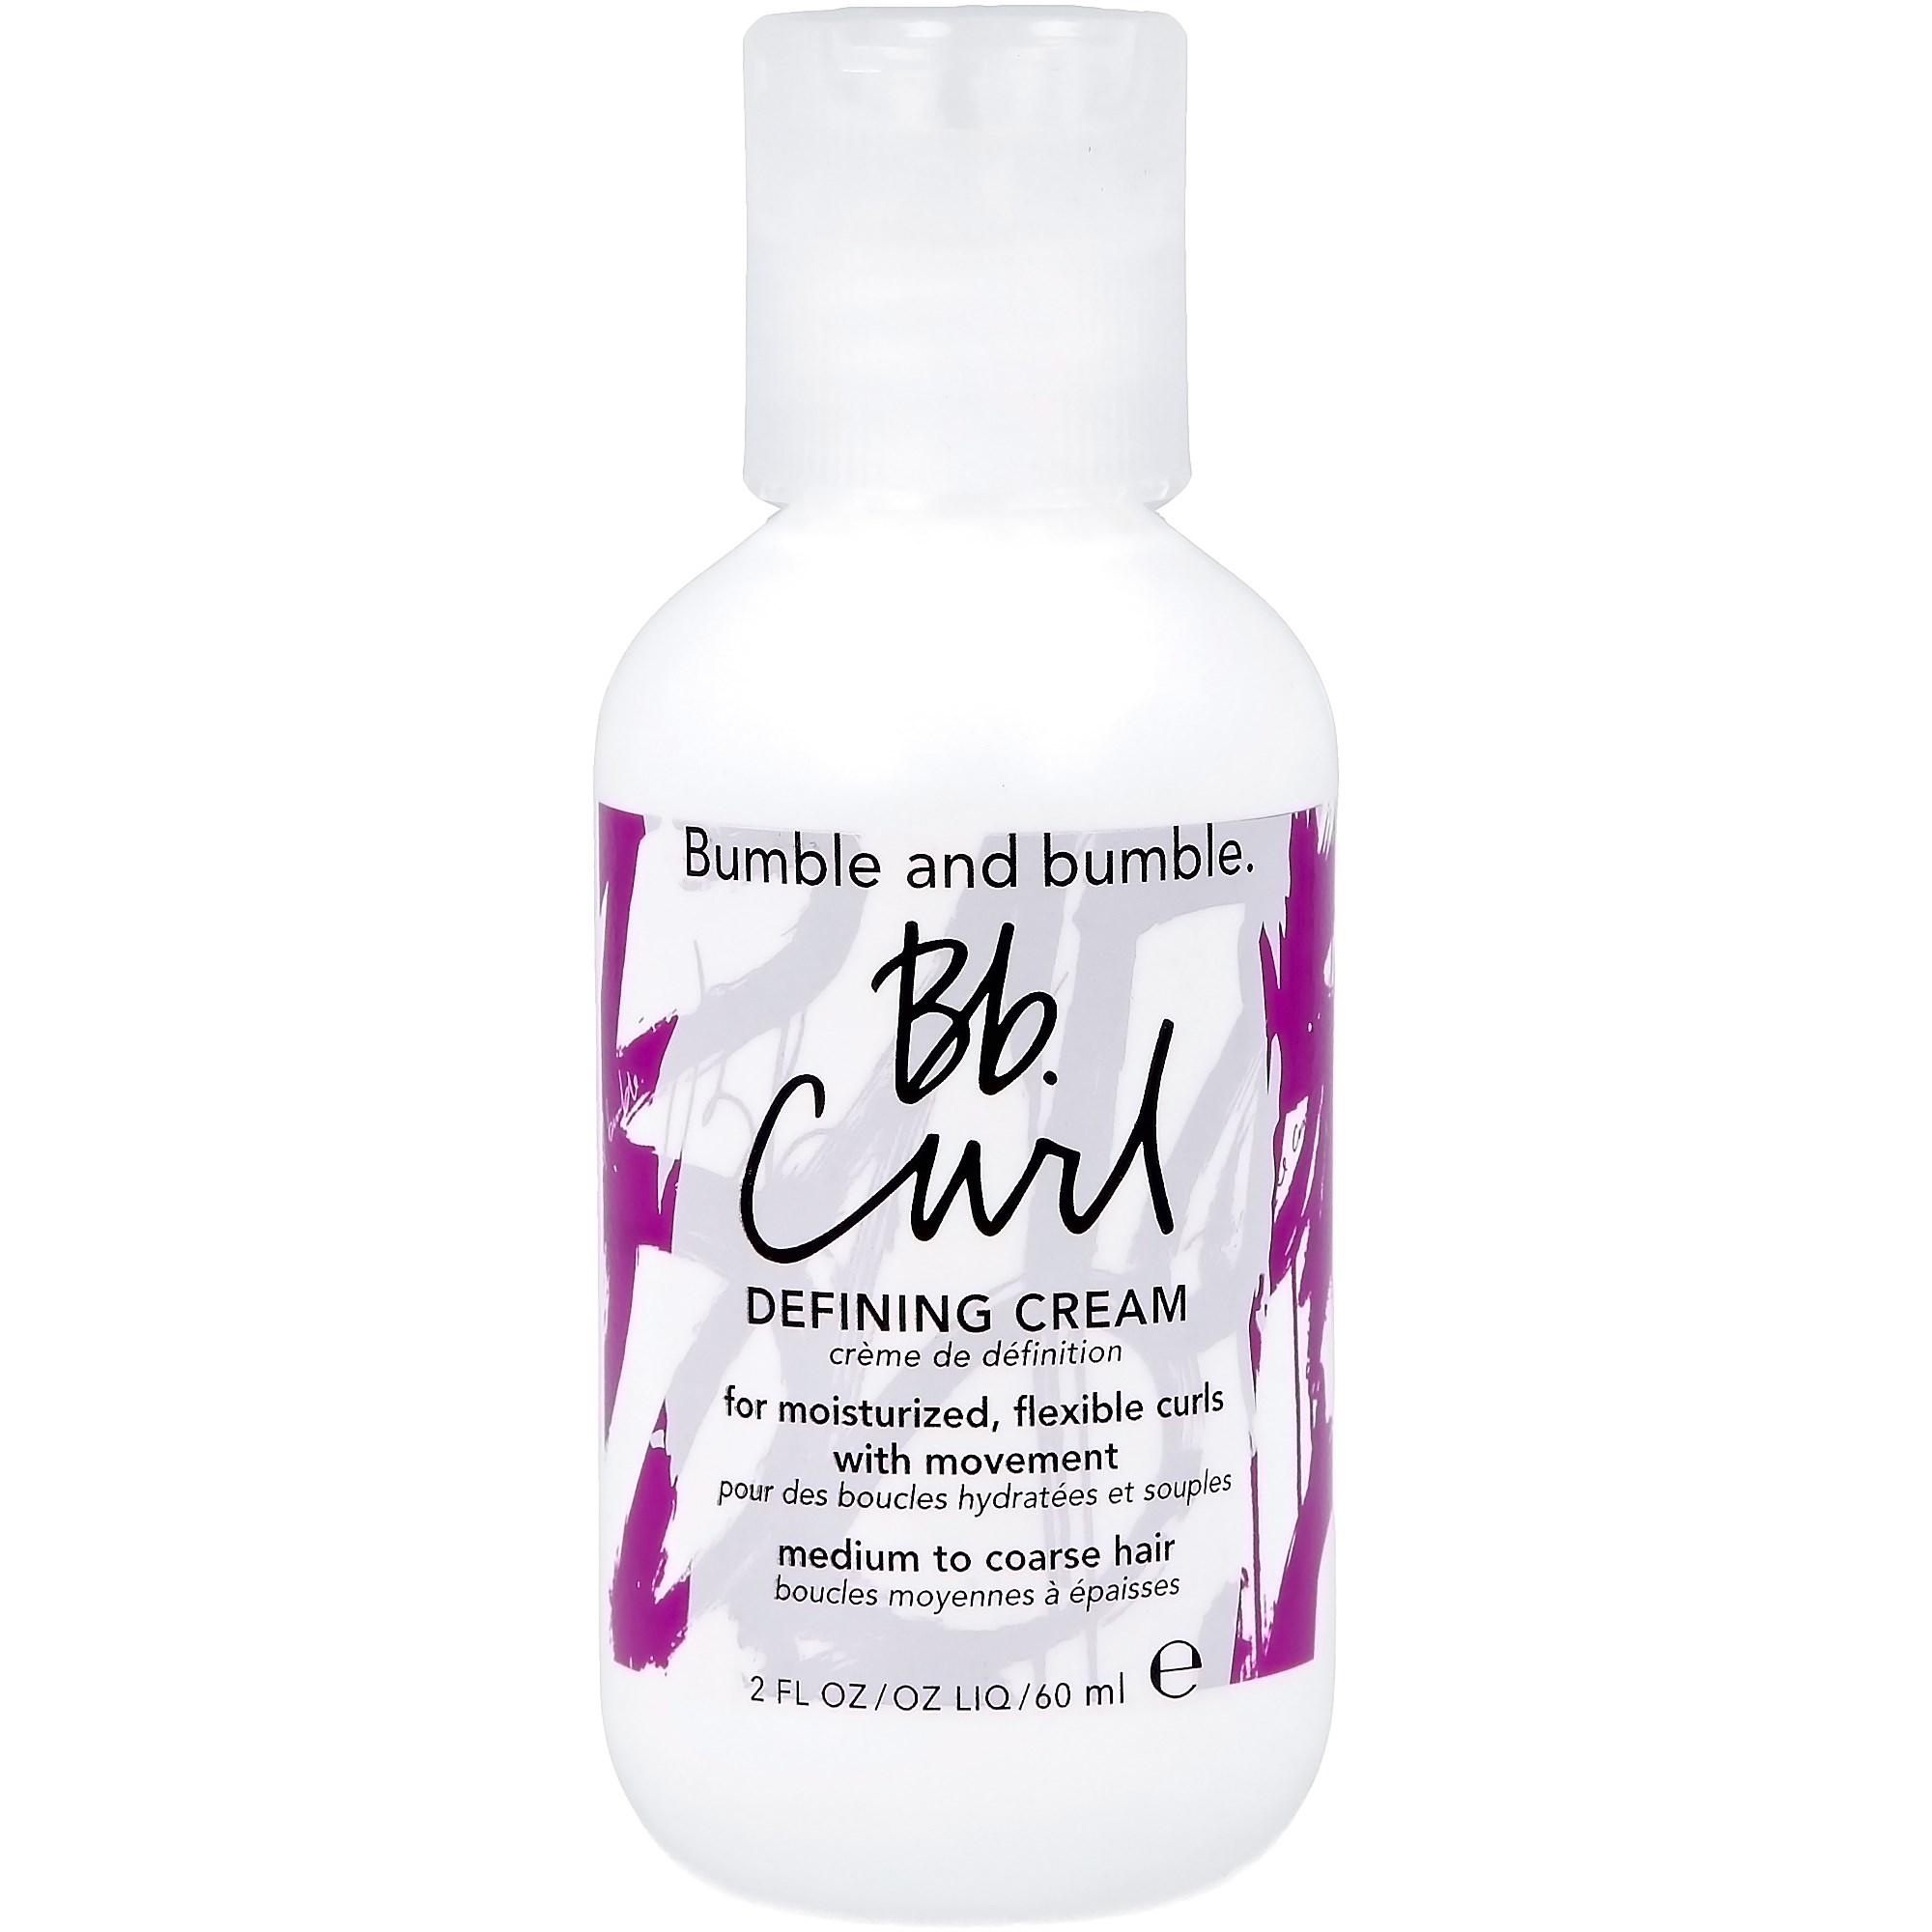 Bumble and bumble Curl Defining Cream 60 ml